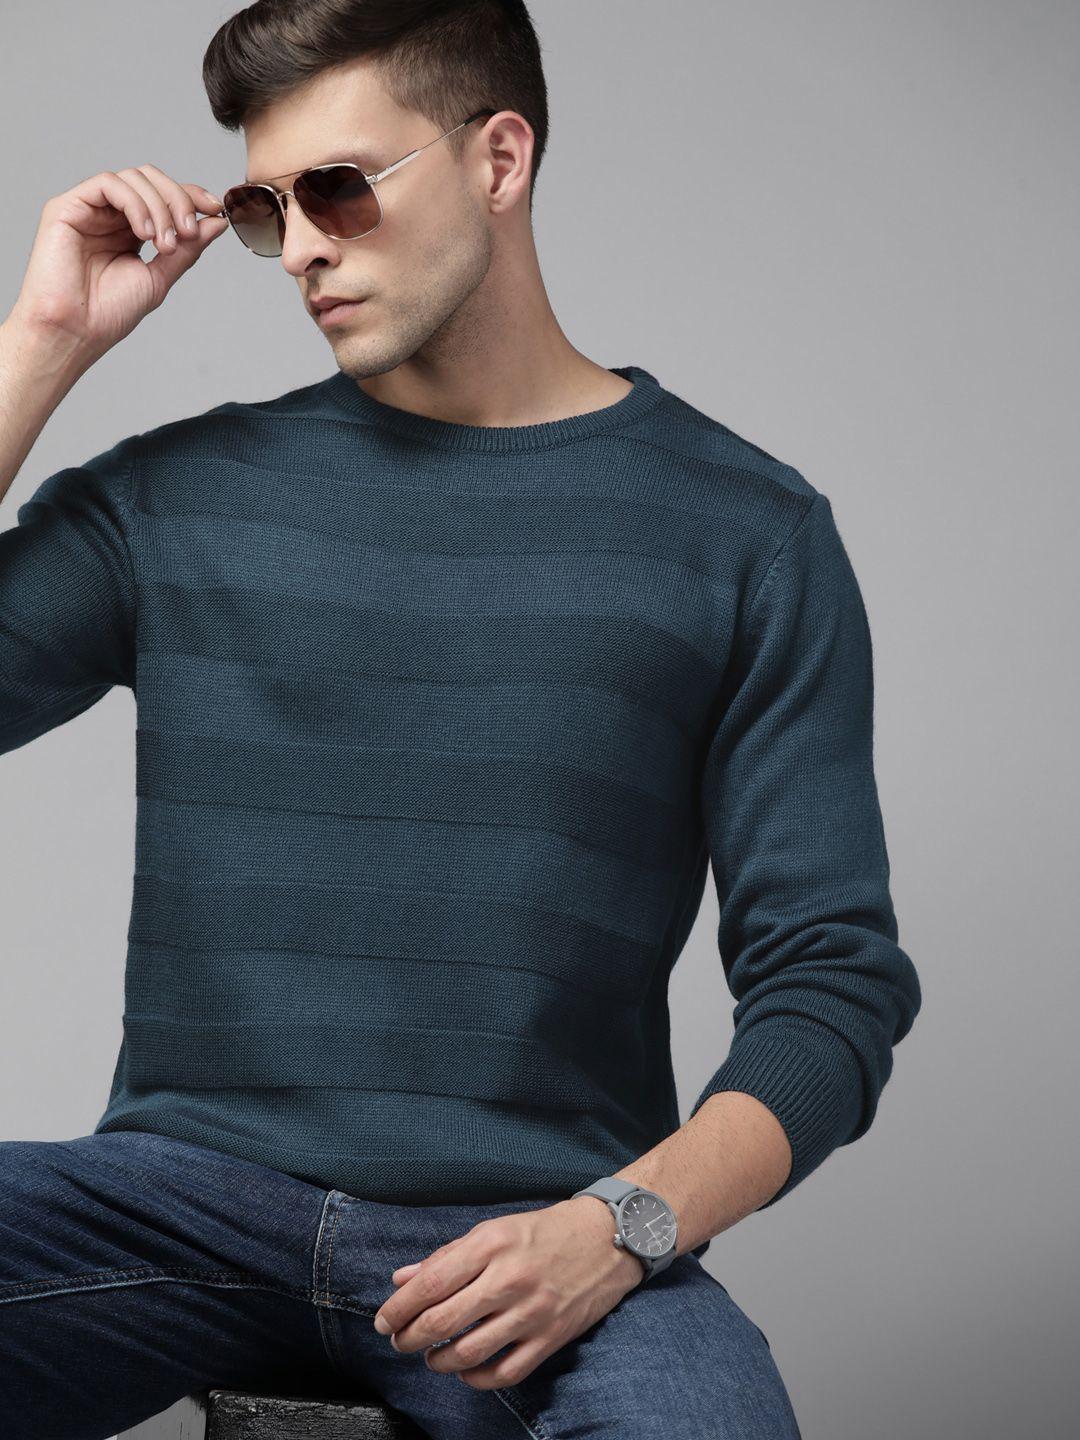 The Roadster Lifestyle Co. Men Teal Blue Self-Striped Pullover